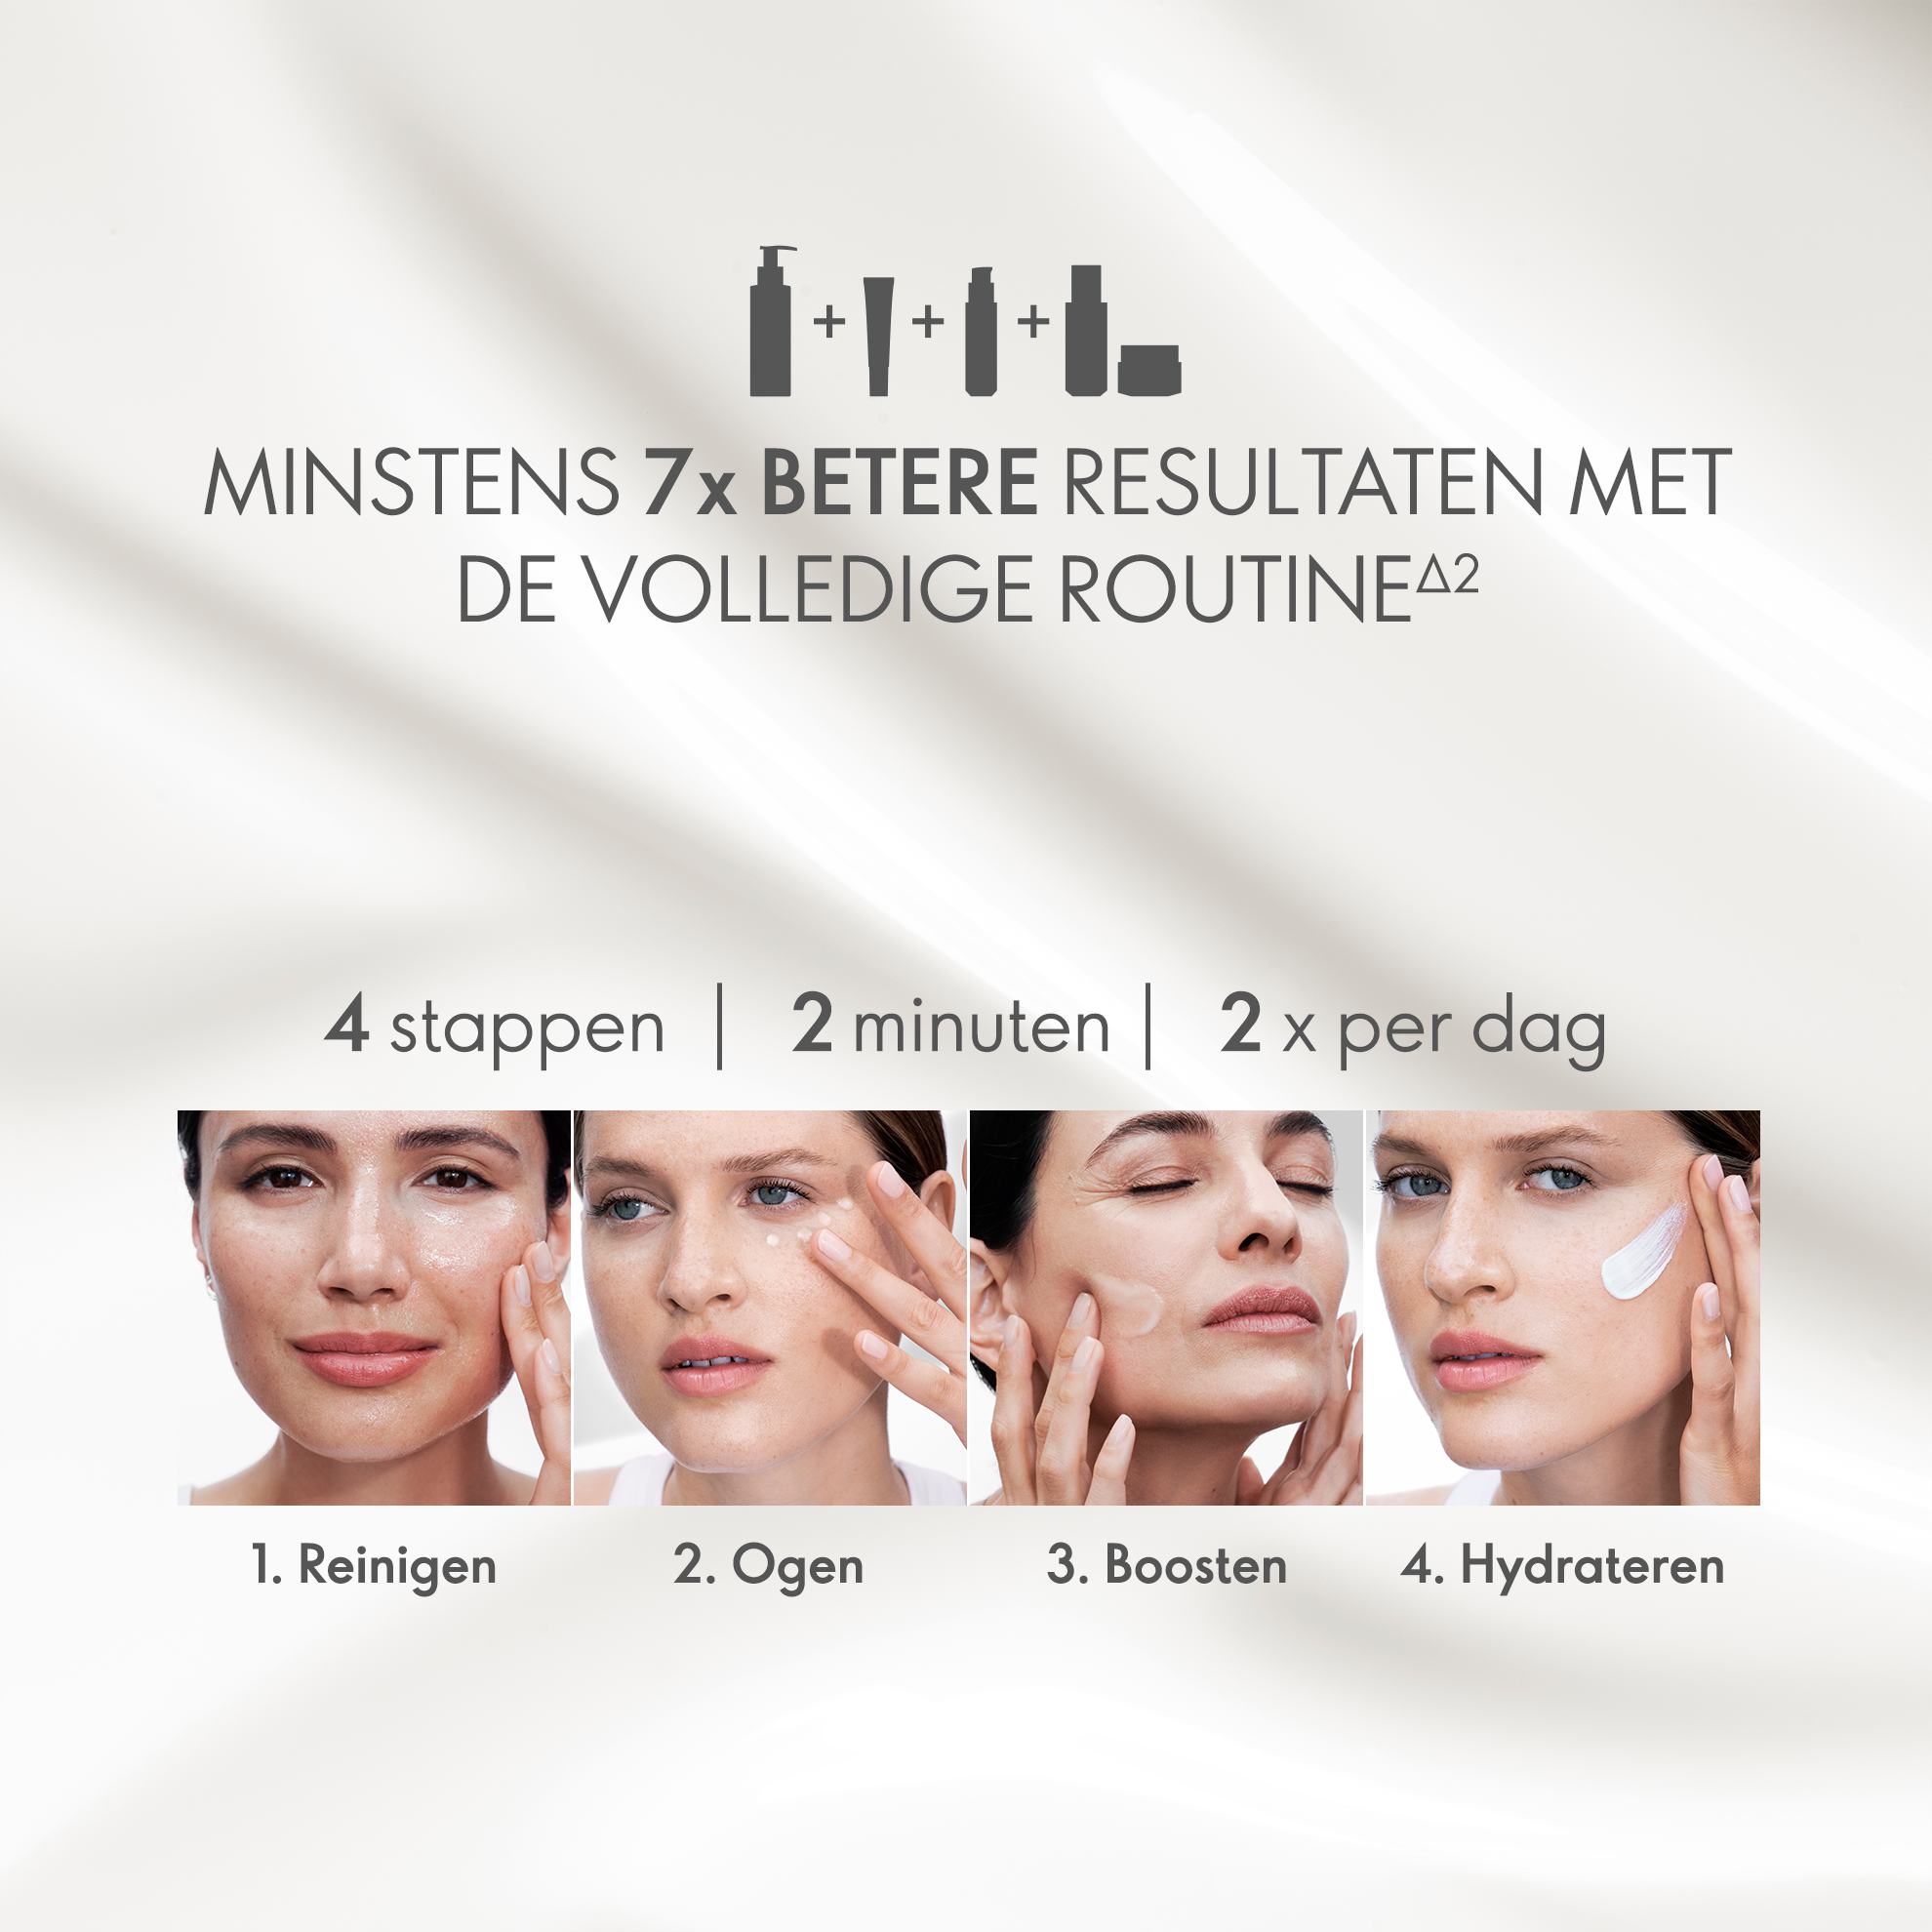 https://media-cdn.oriflame.com/productImage?externalMediaId=product-management-media%2fProducts%2f45590%2fNL%2f45590_5.png&id=17563642&version=1